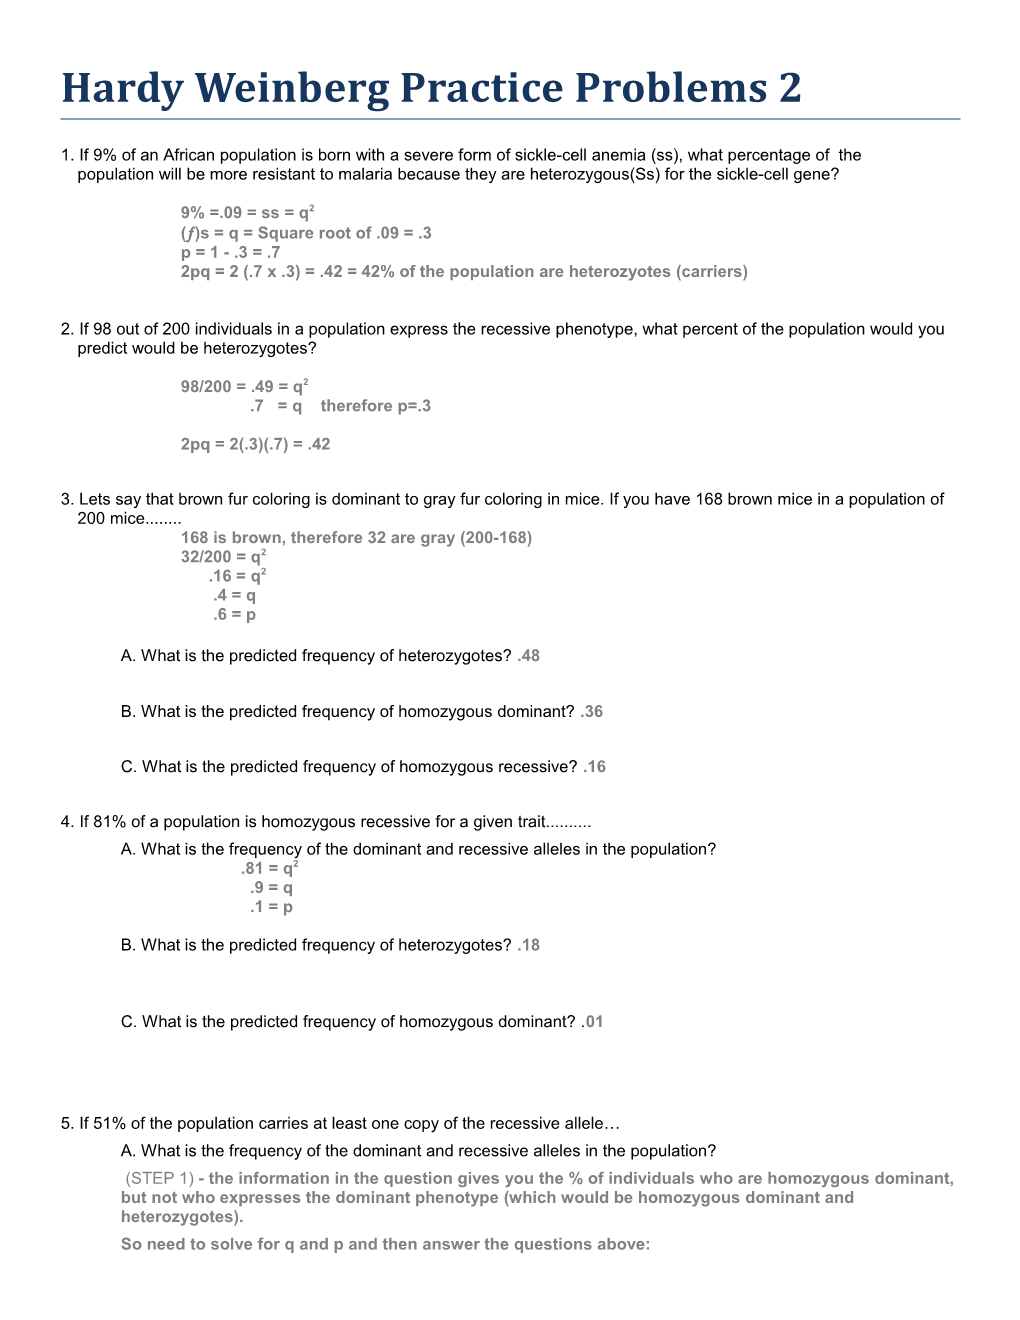 Hardy Weinberg Practice Problems 2